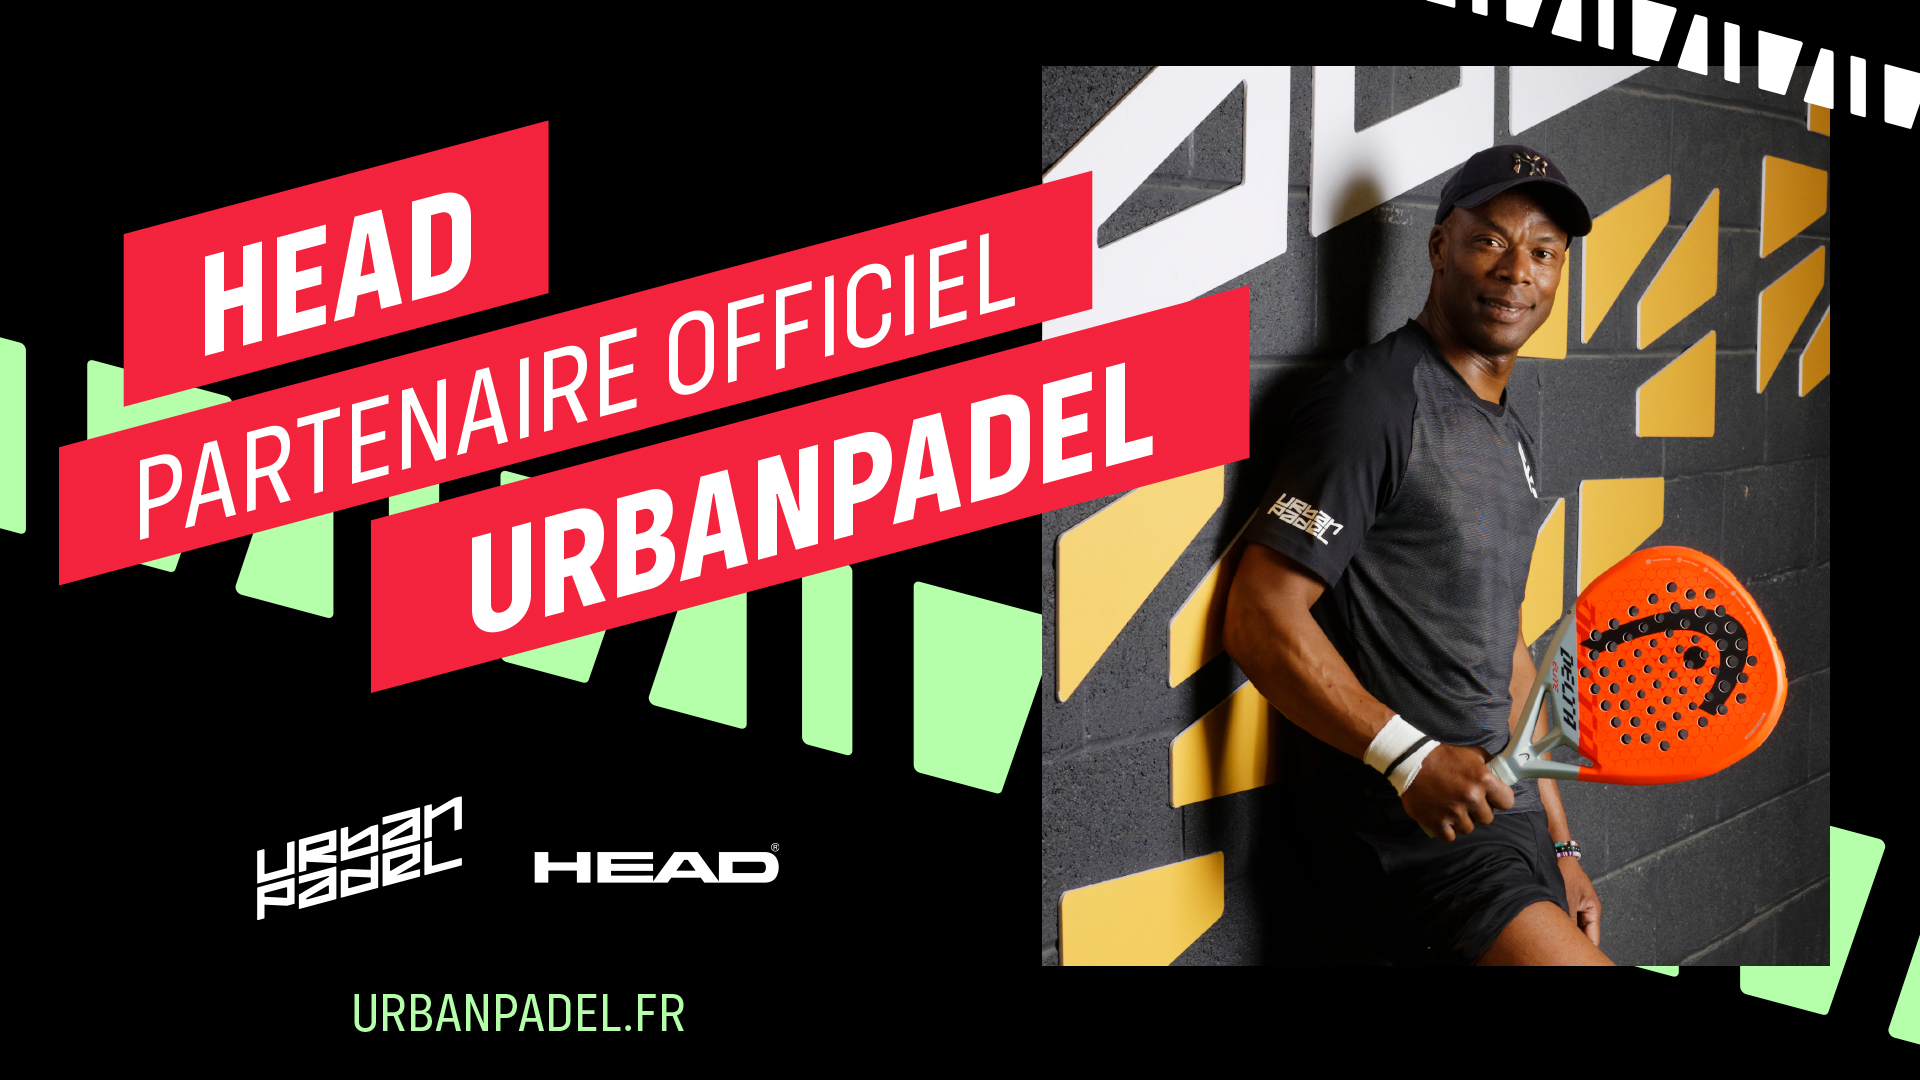 HEAD and UrbanPadel extend and intensify their partnership